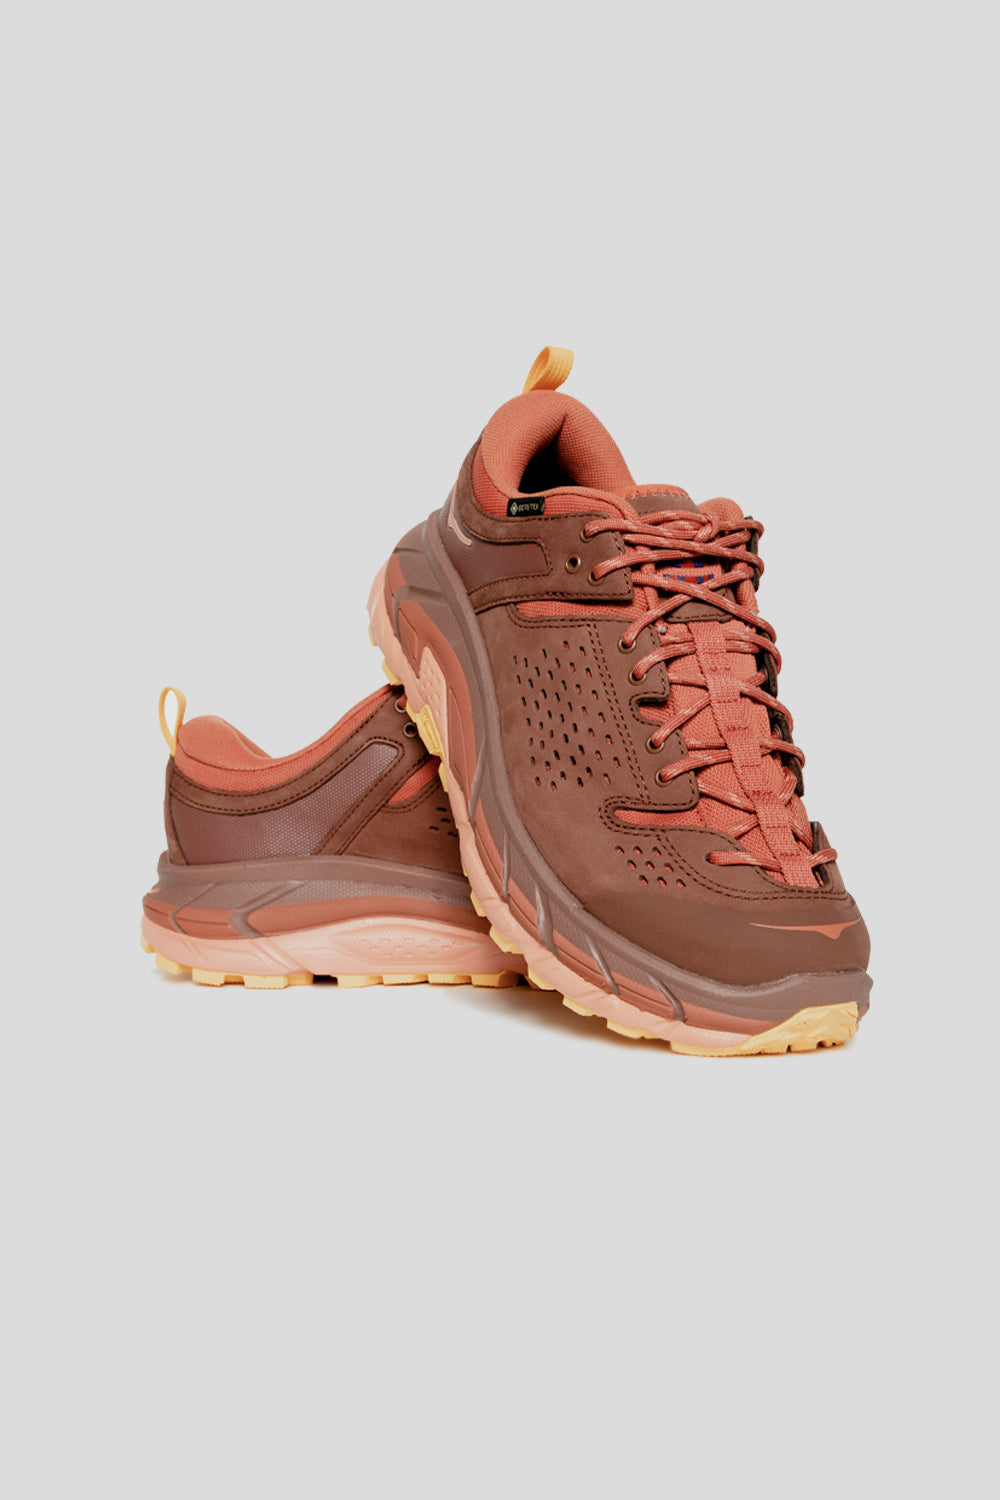 Hoka All Gender TOR ULTRA LO in Spice/Hot Sauce